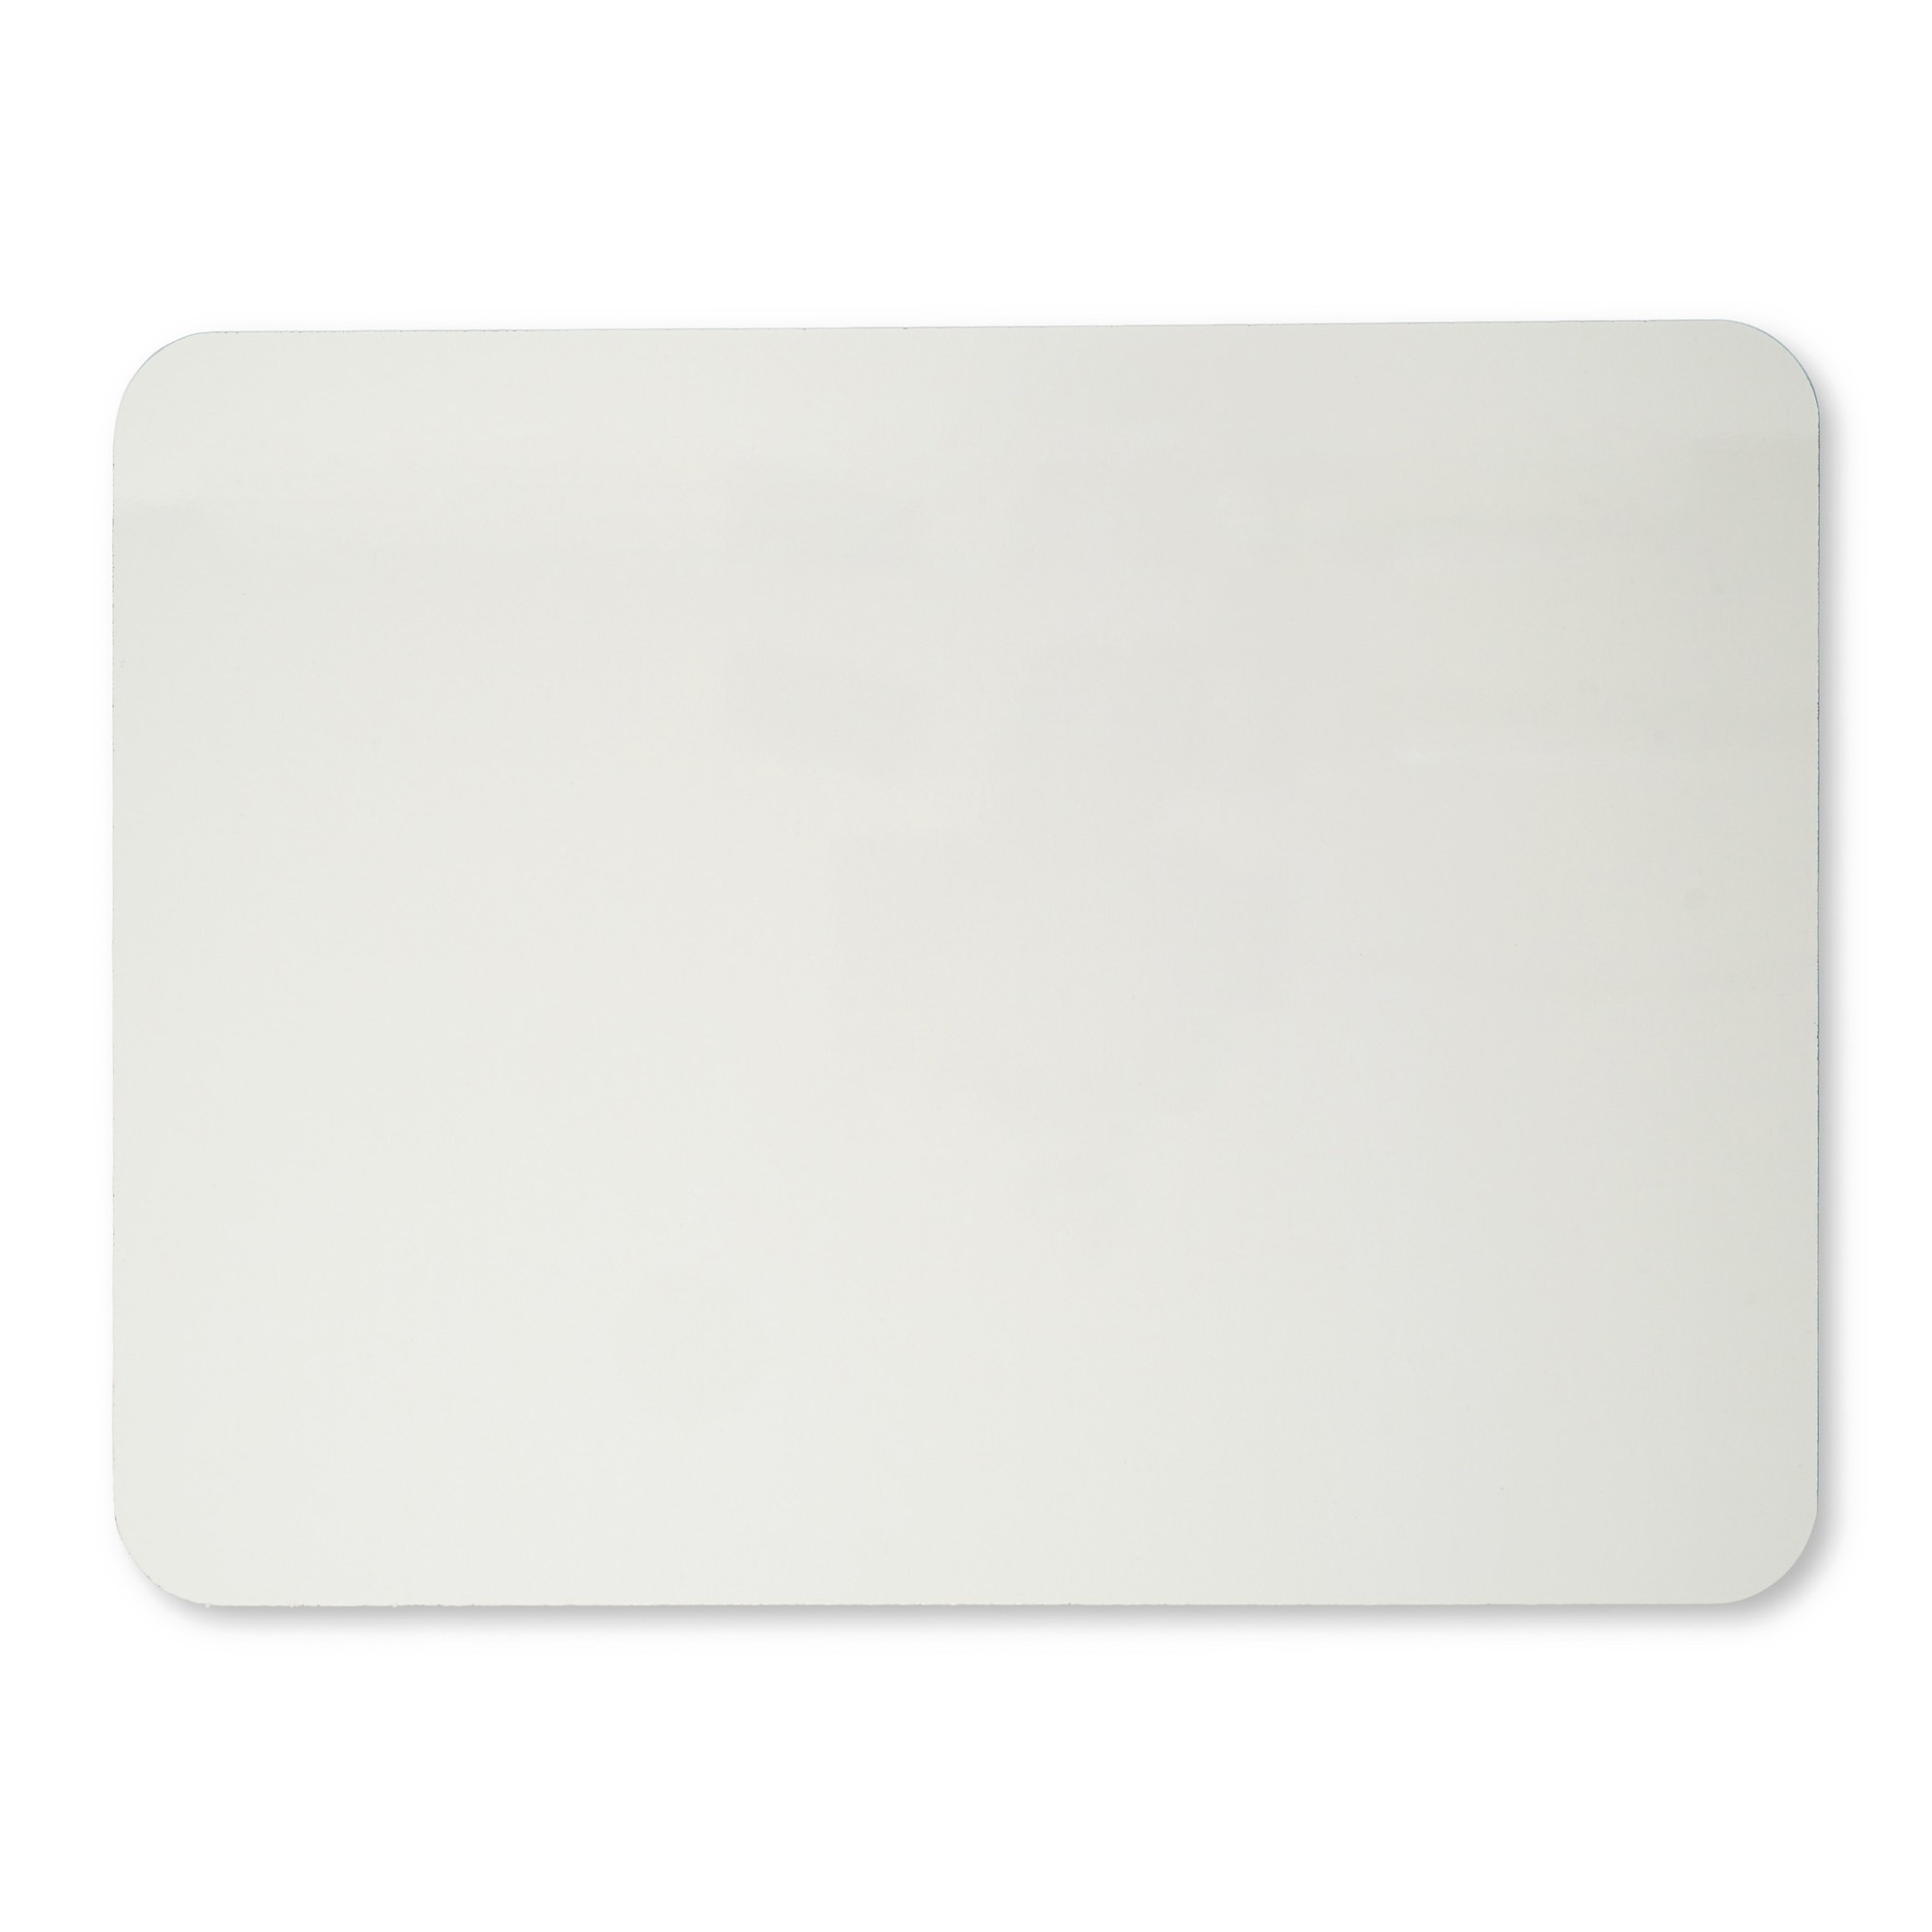 Magnetic Dry Erase Board, Two Sided, Plain/Plain, 9" x 12"